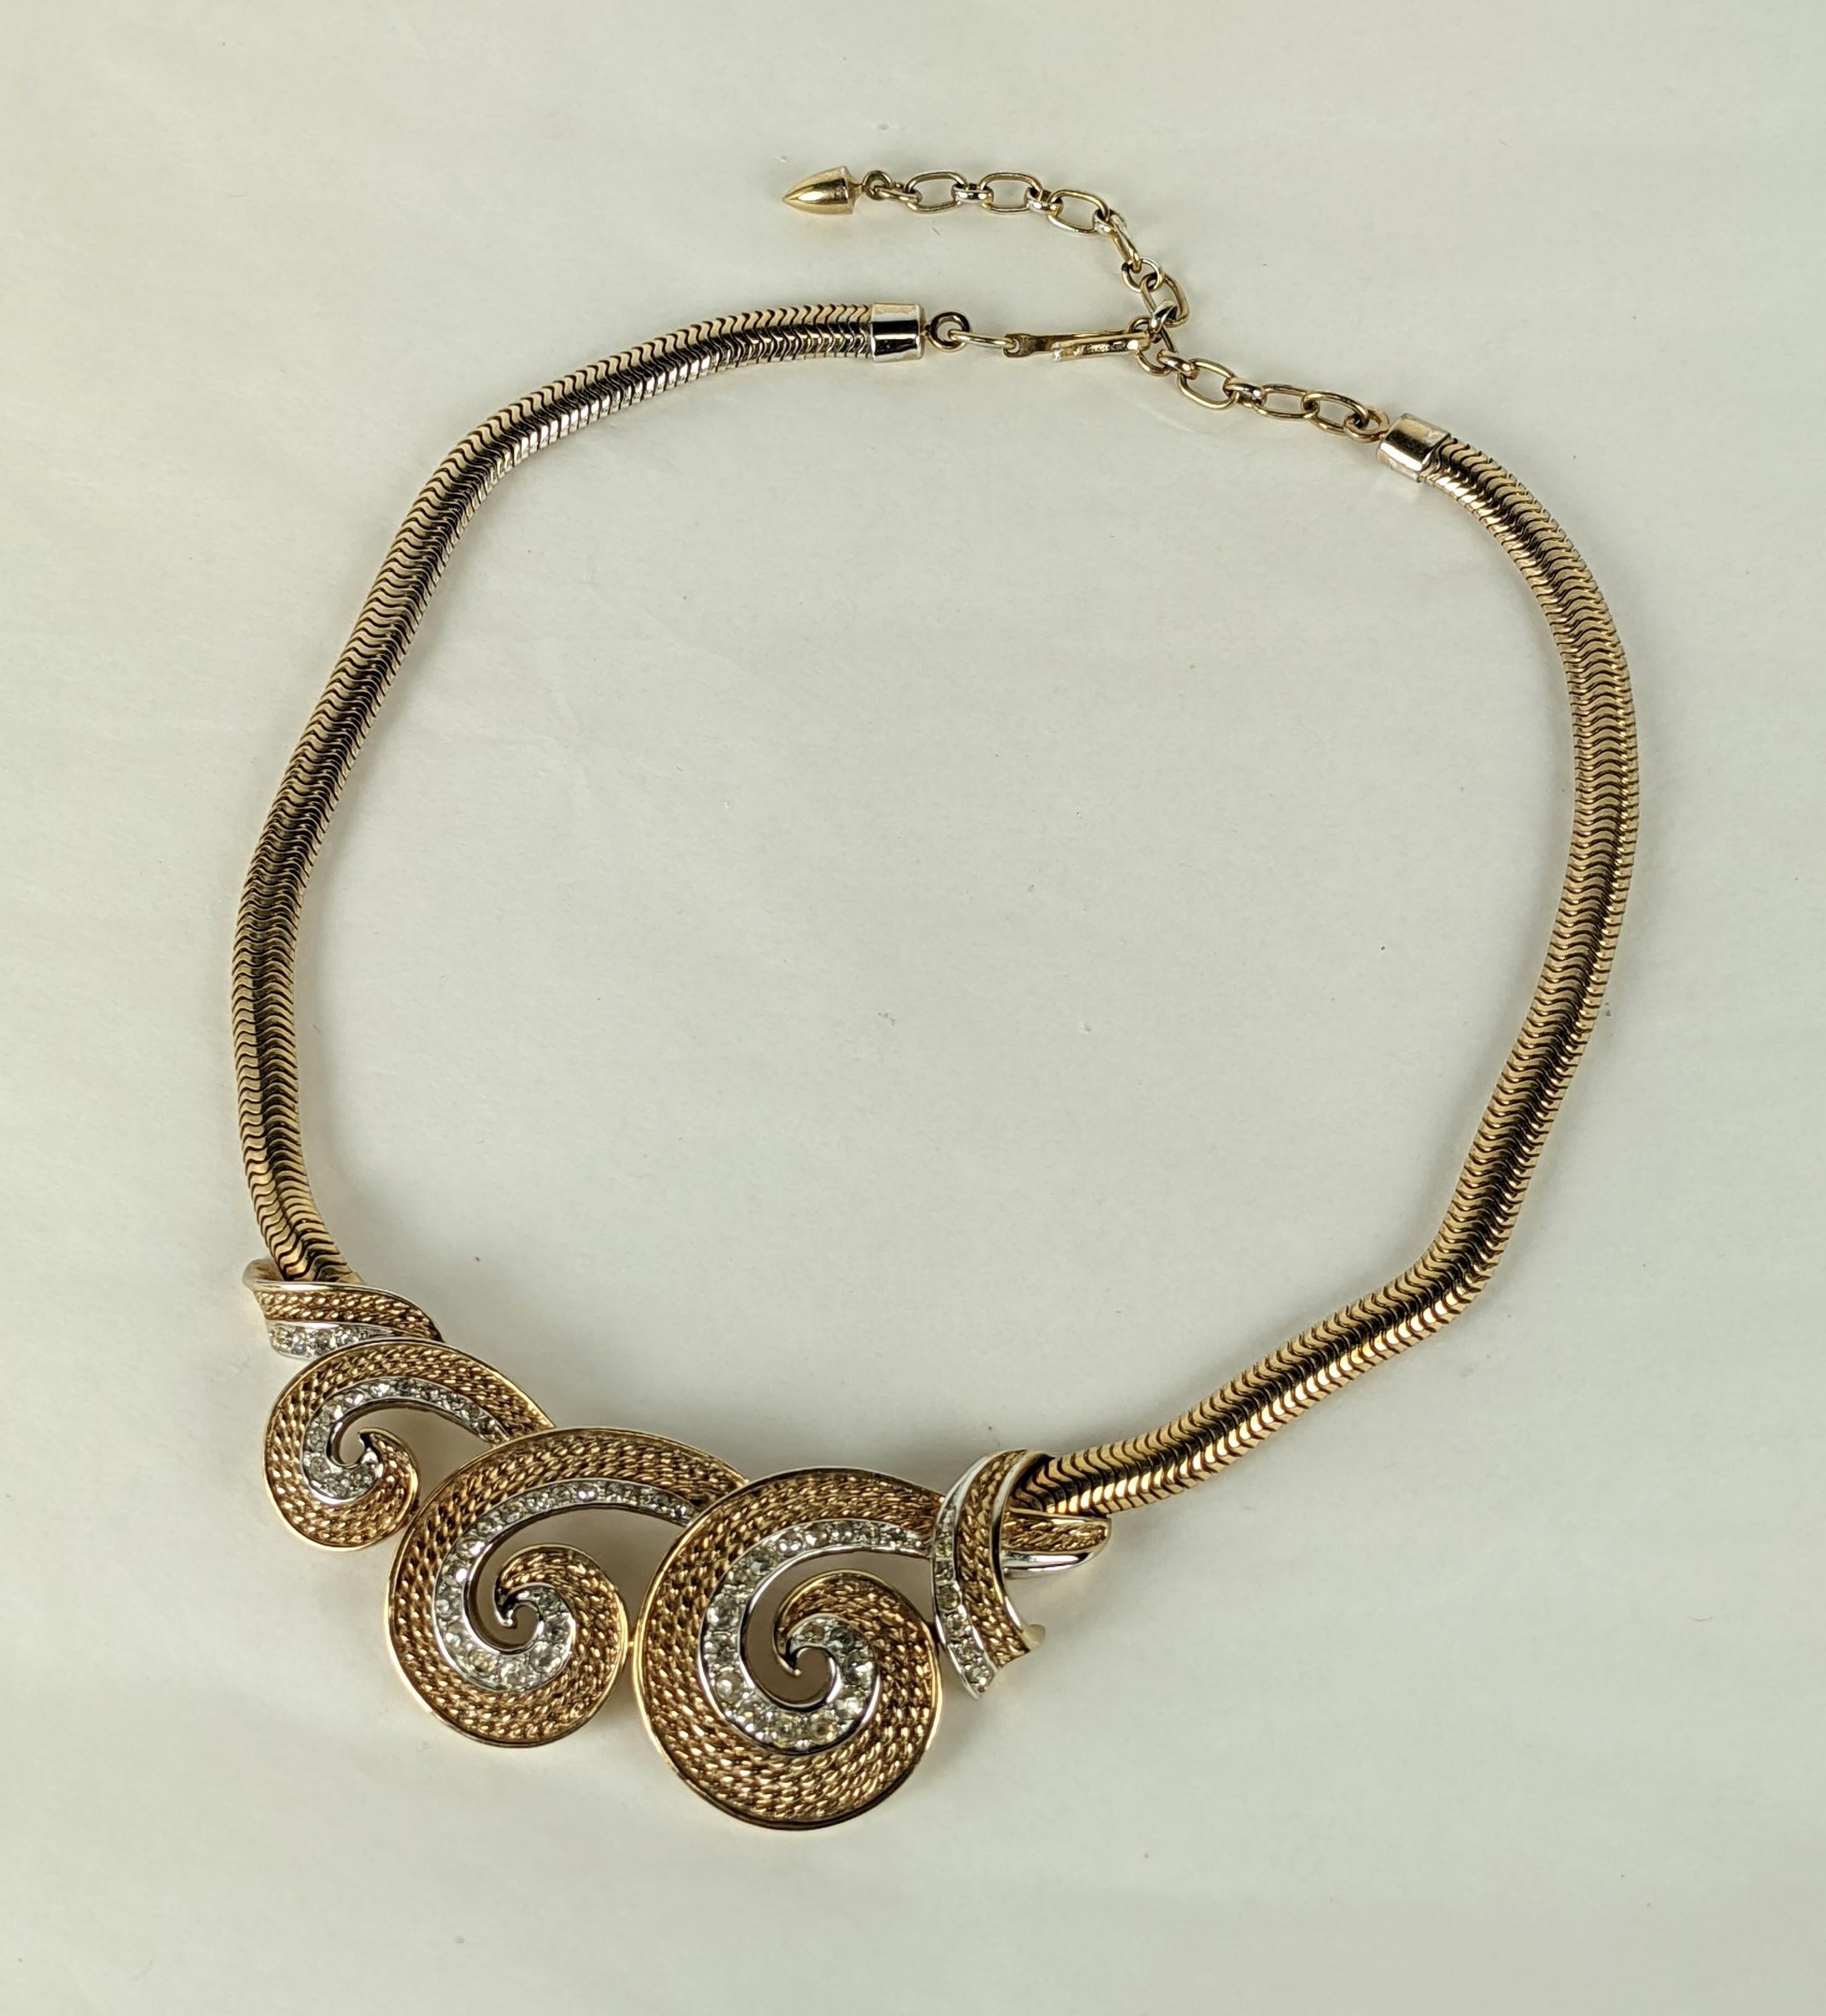 Boucher Pave Scroll Retro Necklace from the 1950's. Scrolled centerpiece is highlighted with pave crystals and hangs from a Retro snake chain. Adjustable chain. 1950's USA.
Signed 